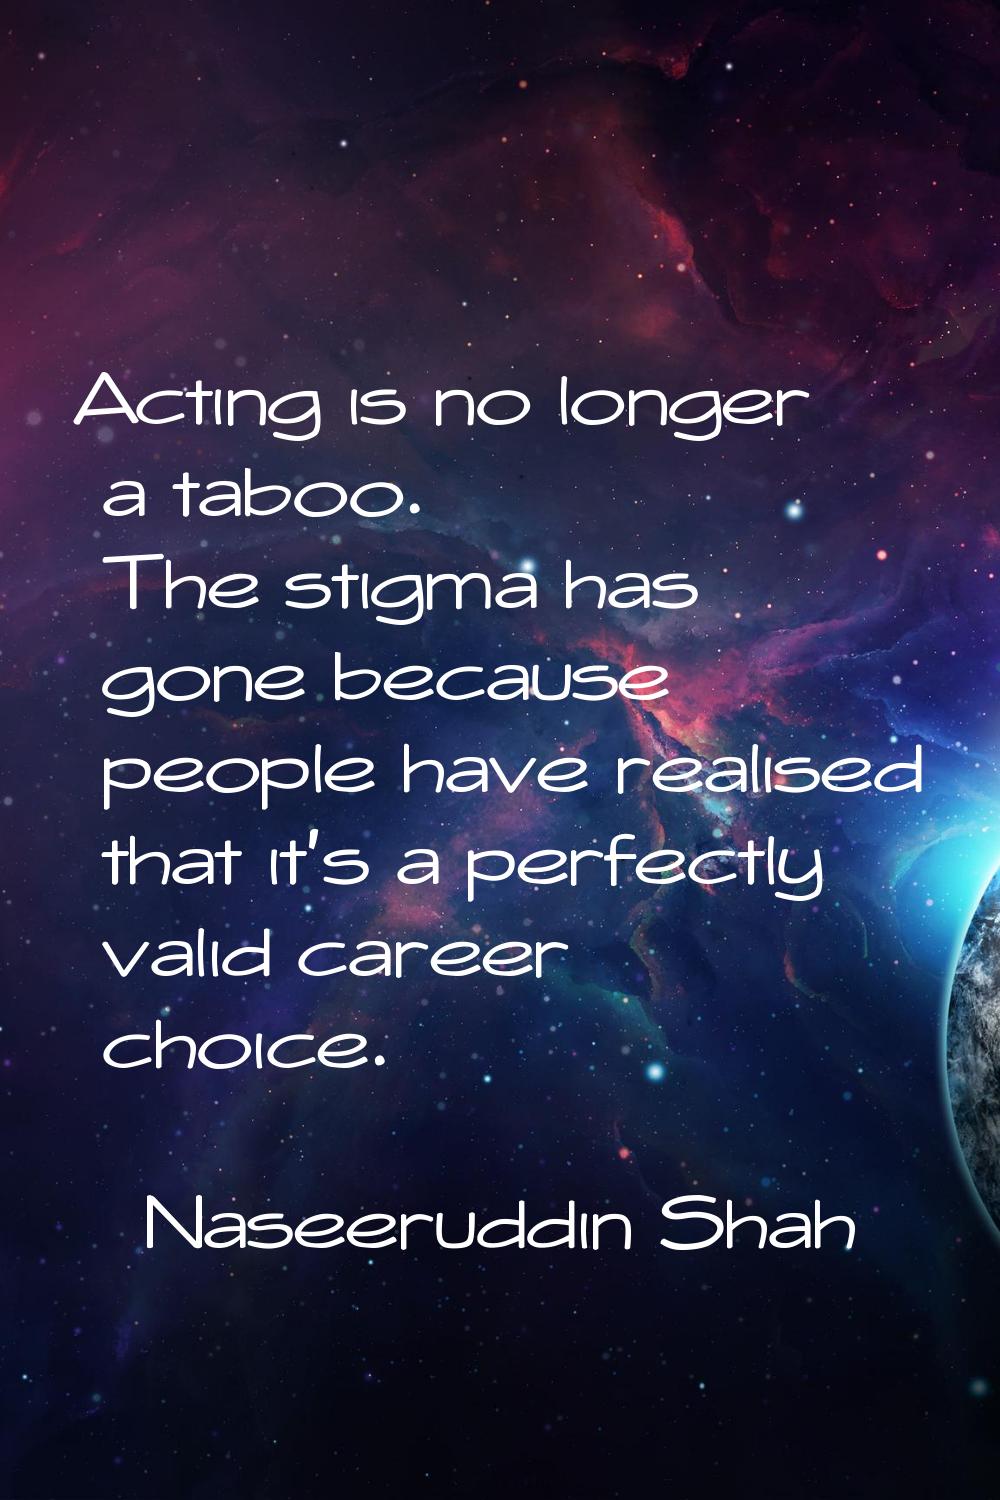 Acting is no longer a taboo. The stigma has gone because people have realised that it's a perfectly